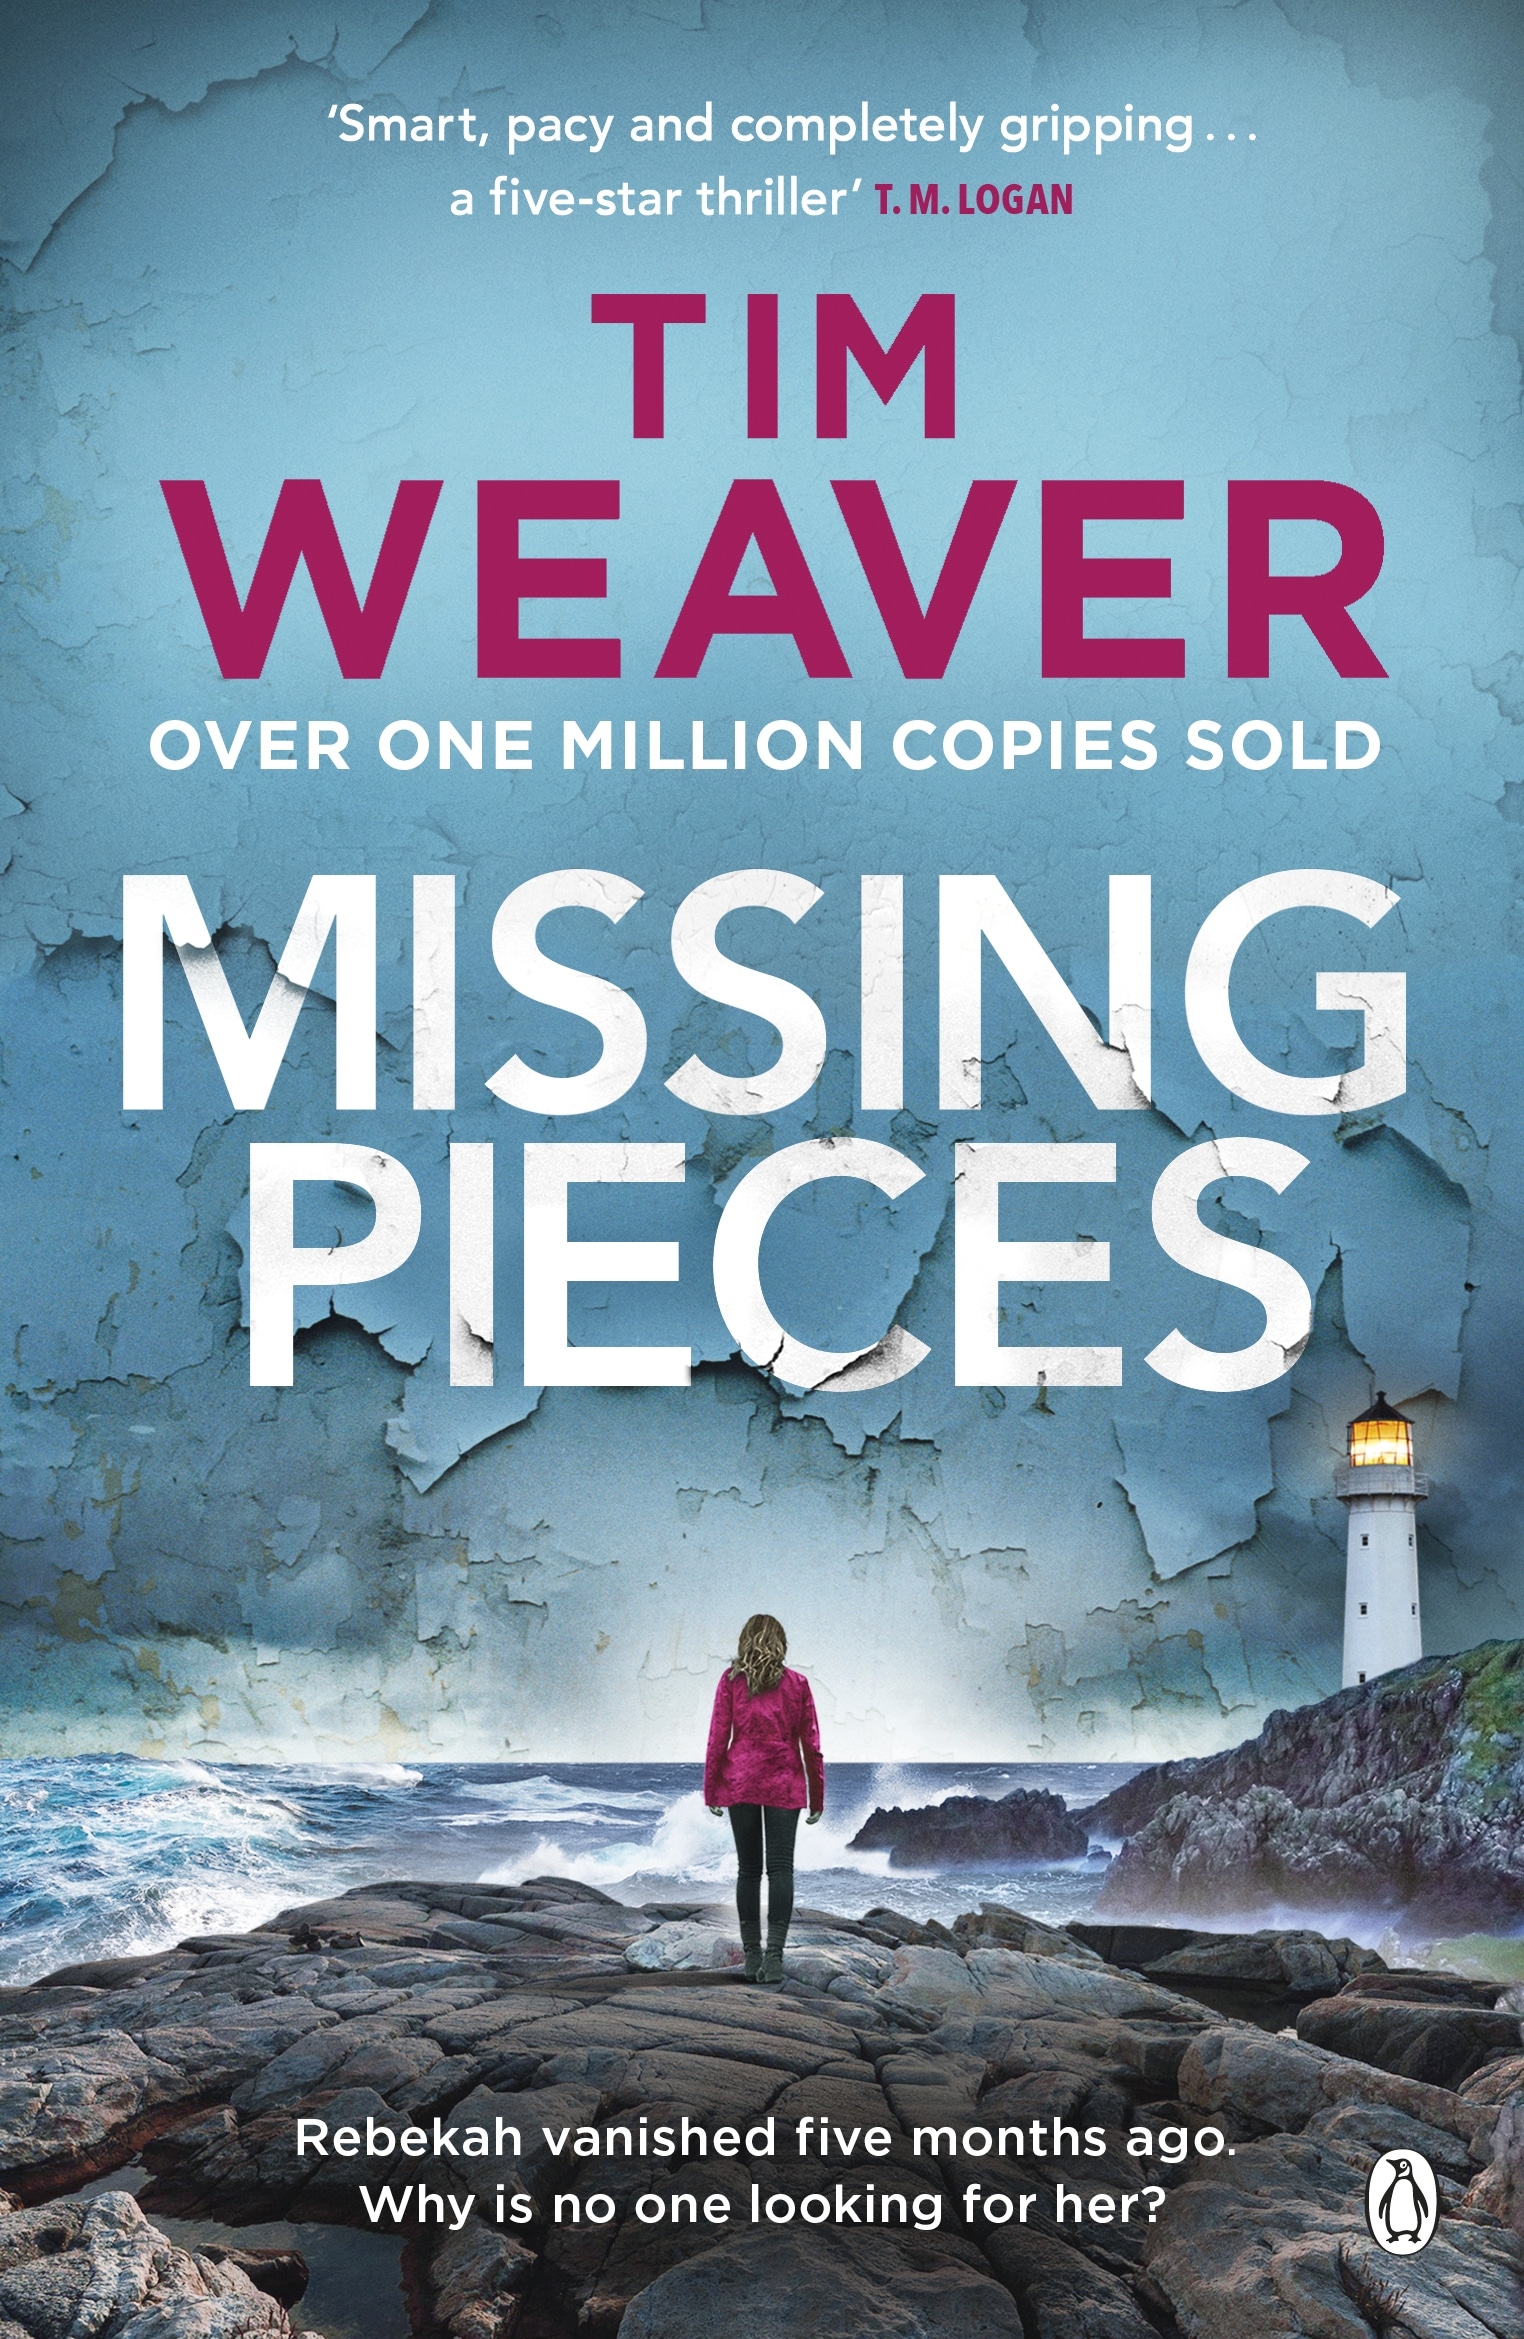 Book “Missing Pieces” by Tim Weaver — July 8, 2021